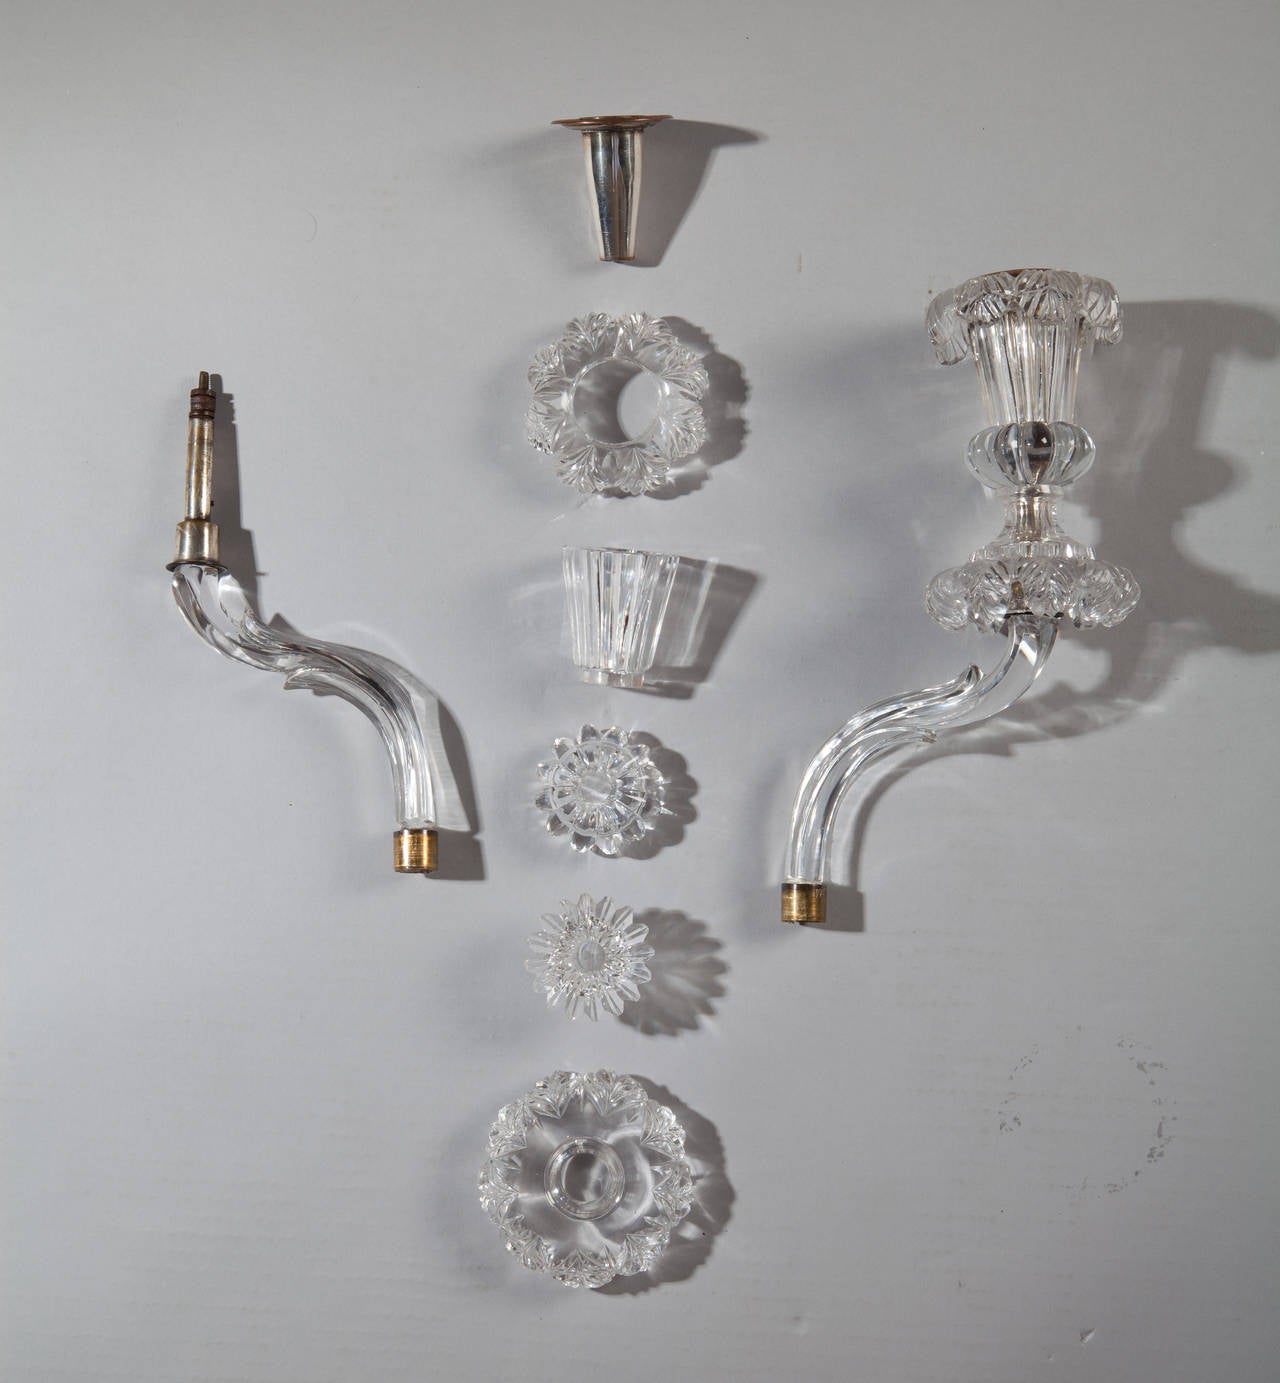 Rare Pair of Regency Cut Glass Two-Light Candelabra In Excellent Condition In London, by appointment only